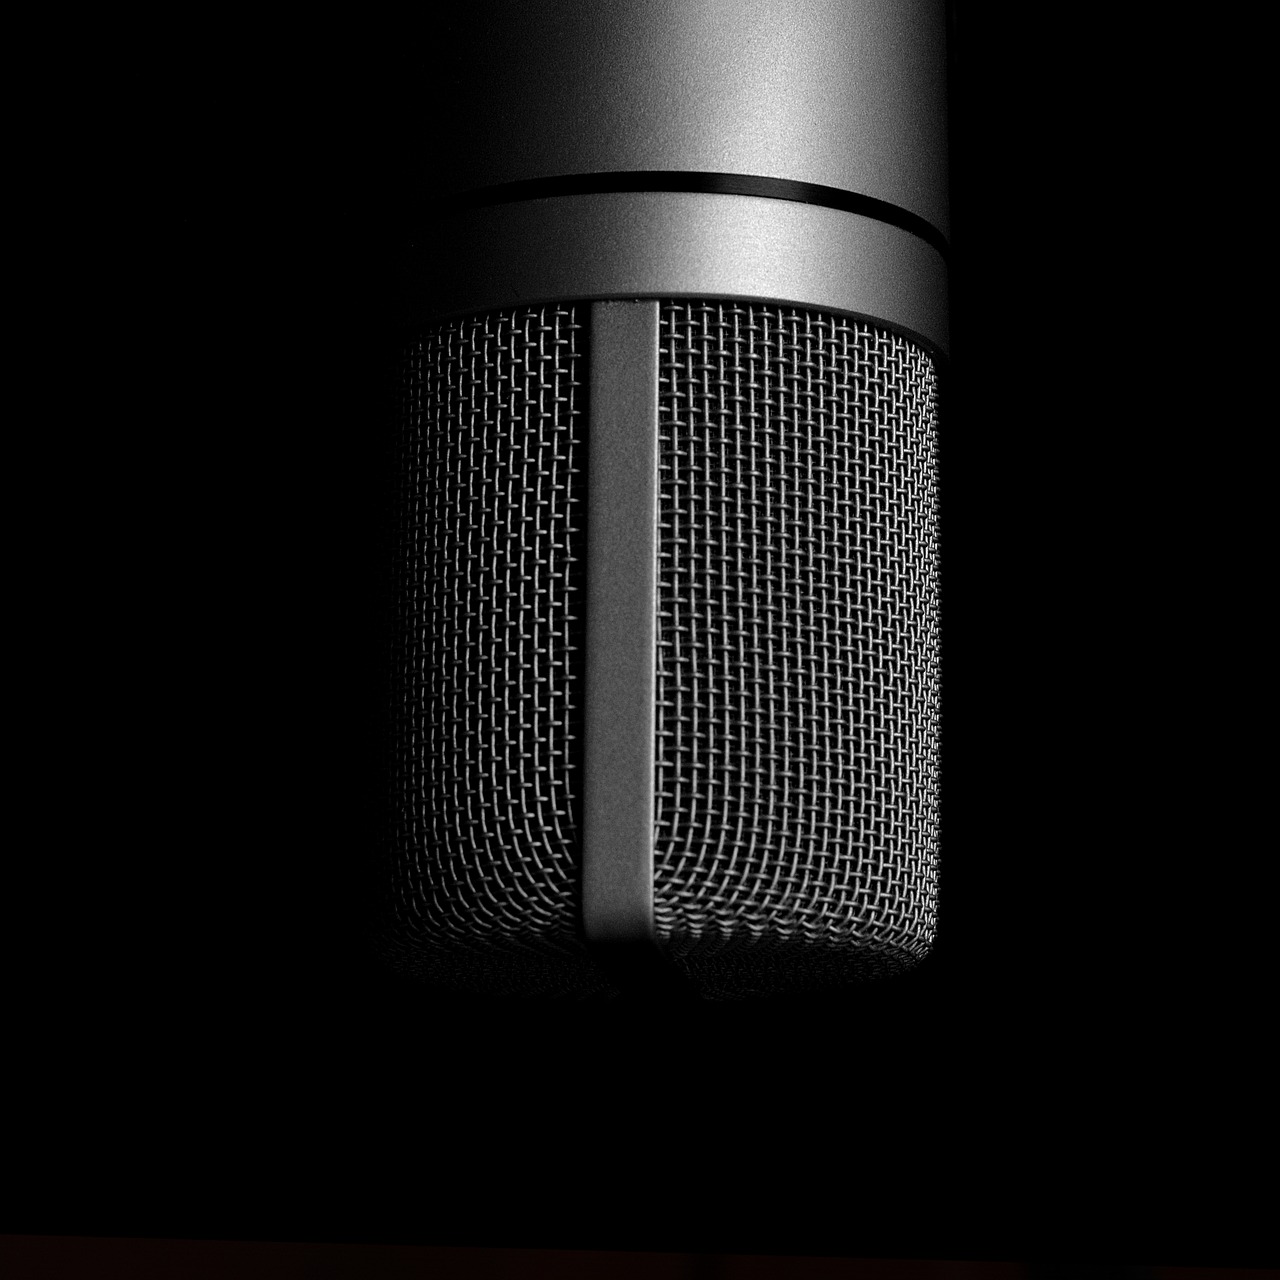 Microphone Music I Am A Student  - FOTEROS / Pixabay